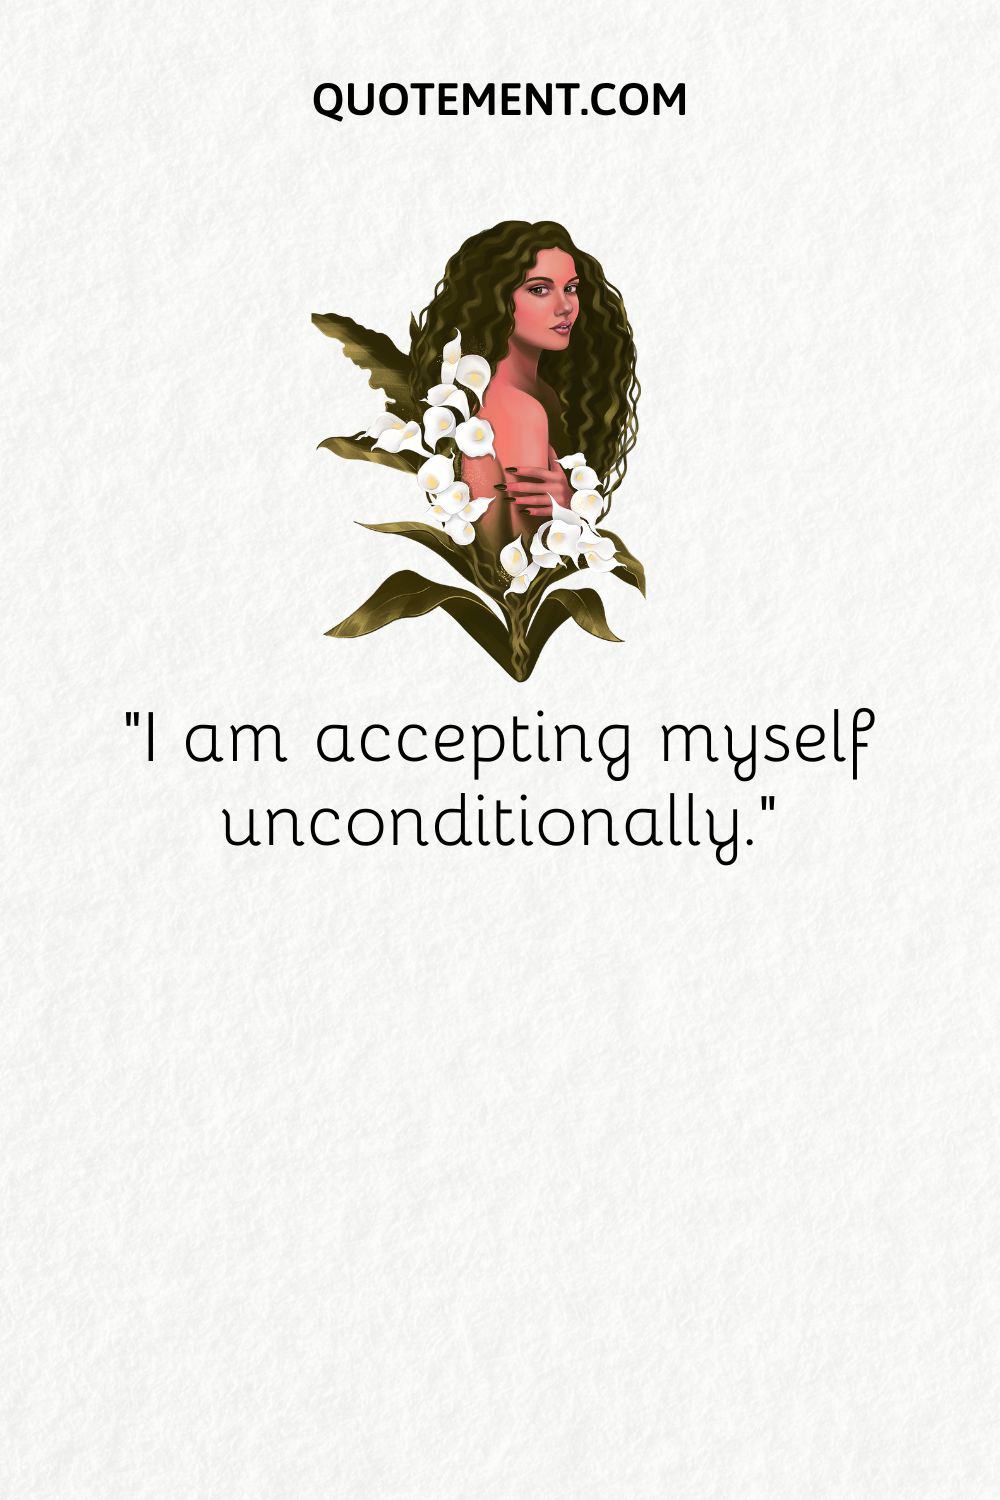 I am accepting myself unconditionally